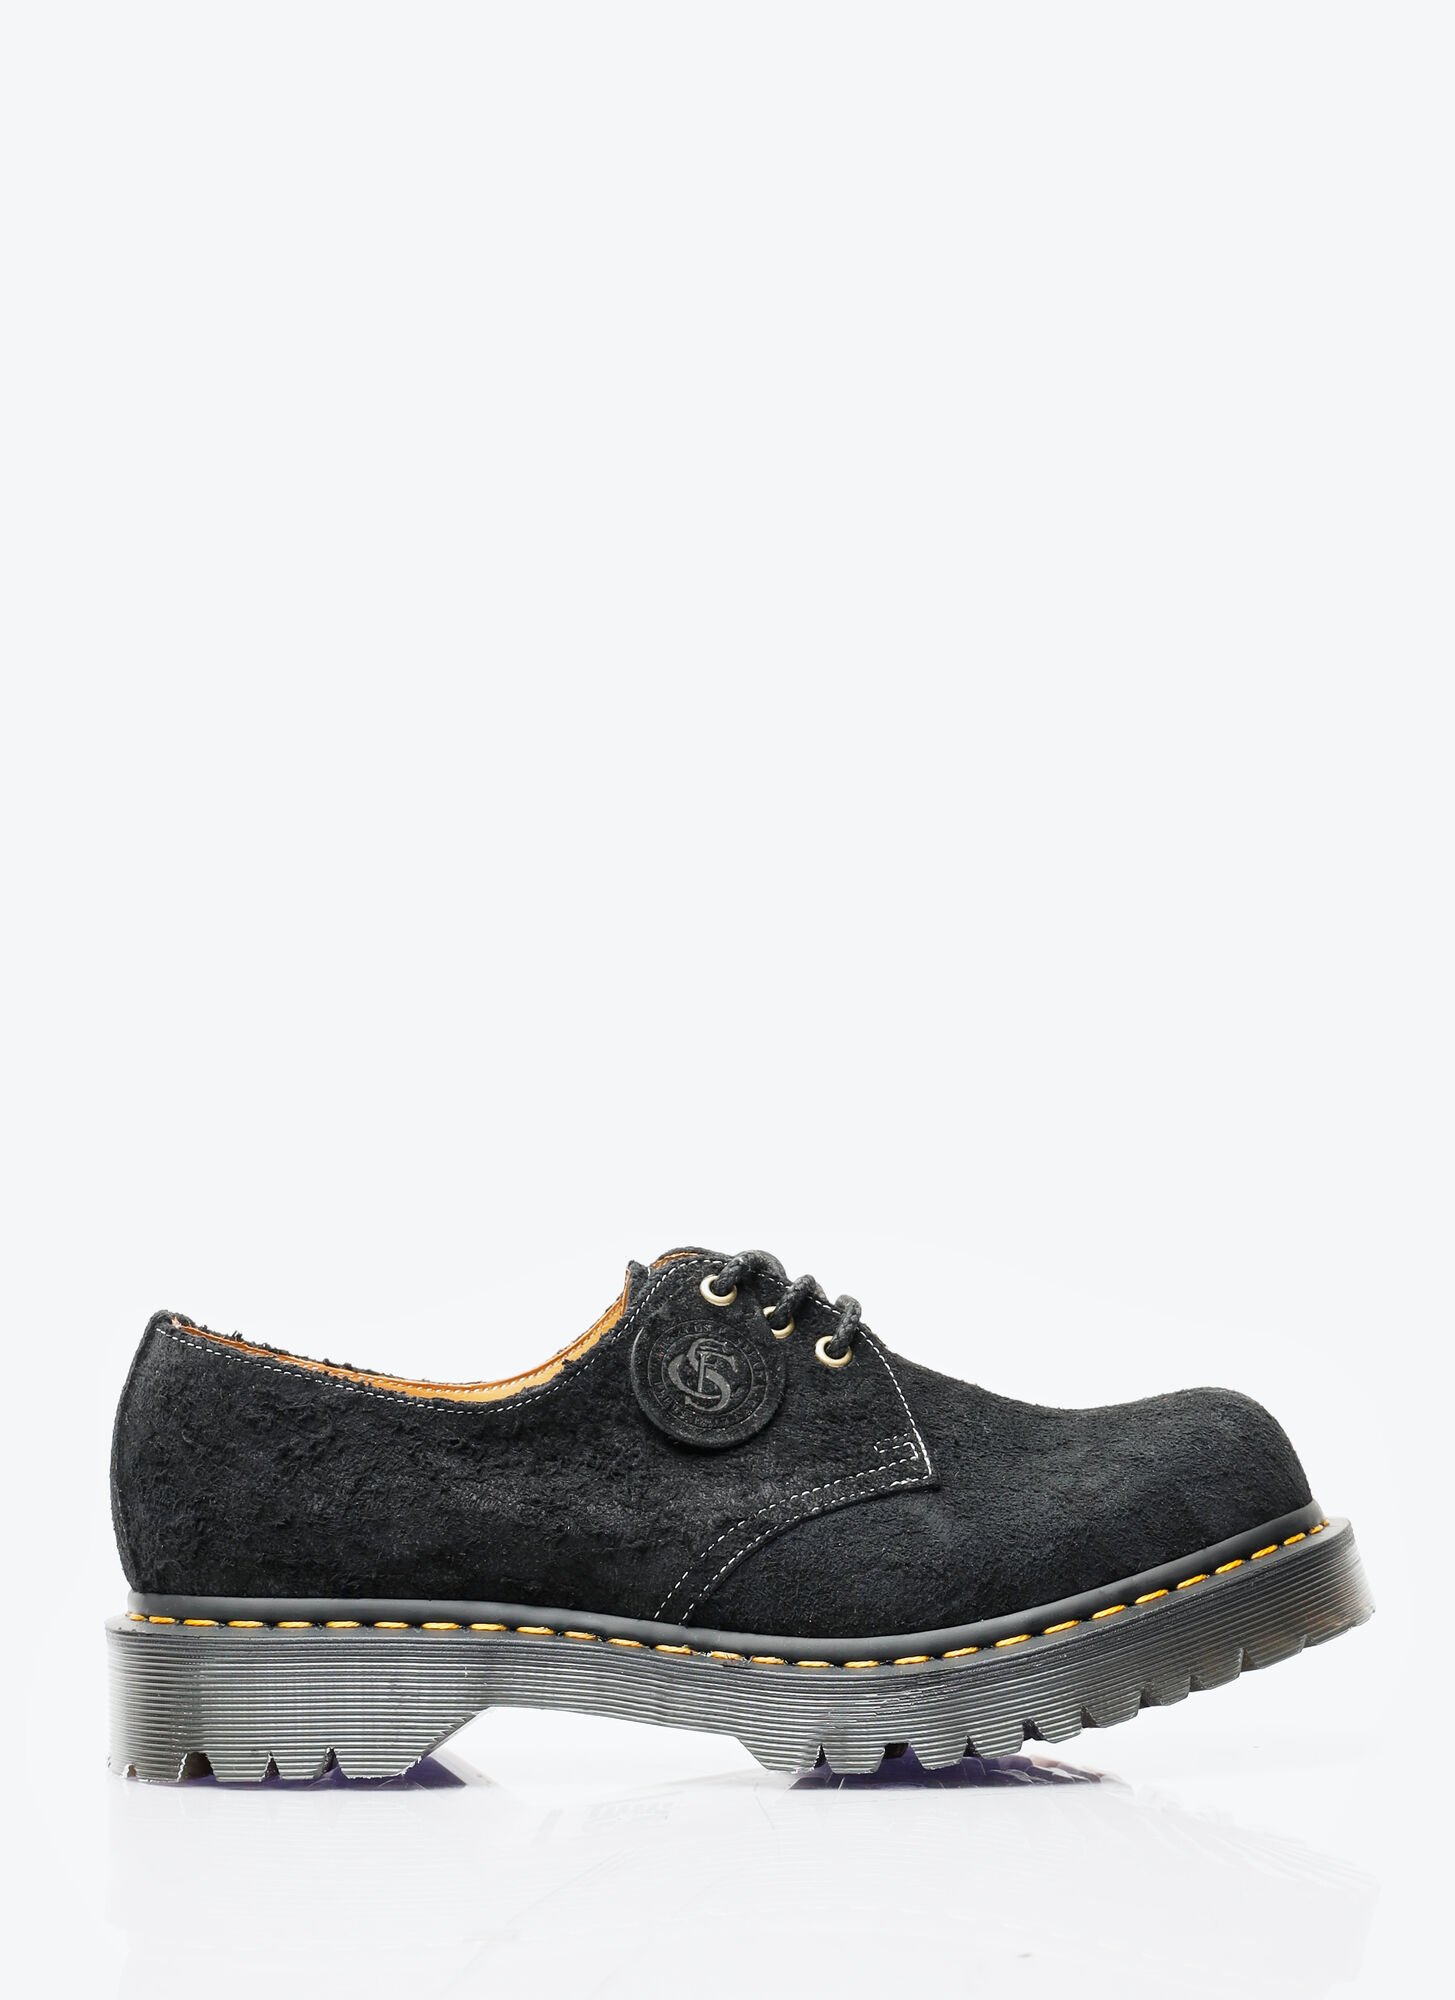 Dr. Martens' 1461 Bex Grand Canyon Suede Lace-up Shoes In Black